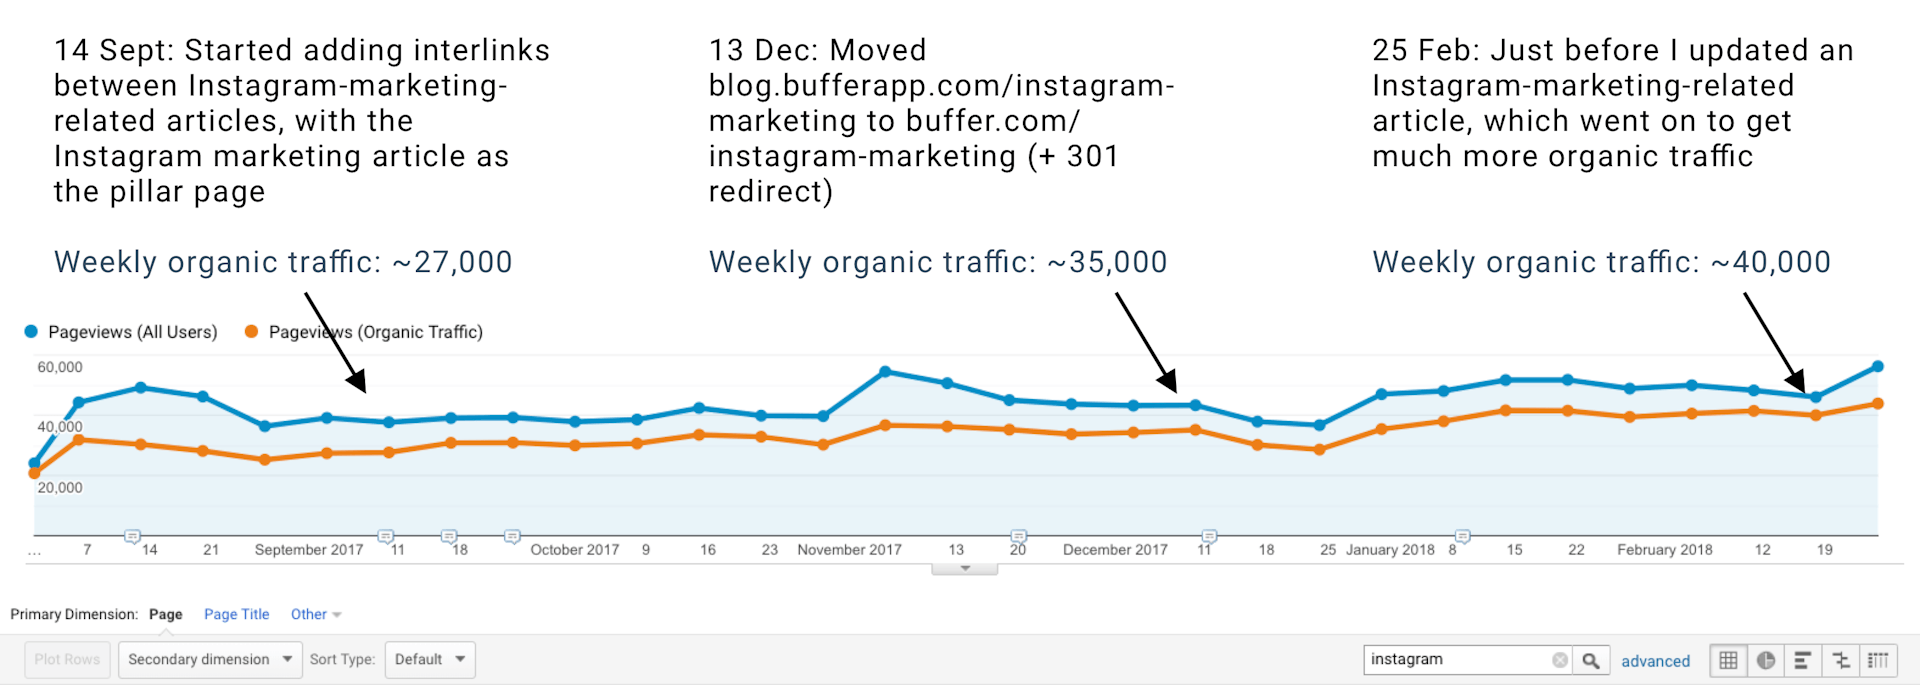 Organic traffic growth from topic cluster